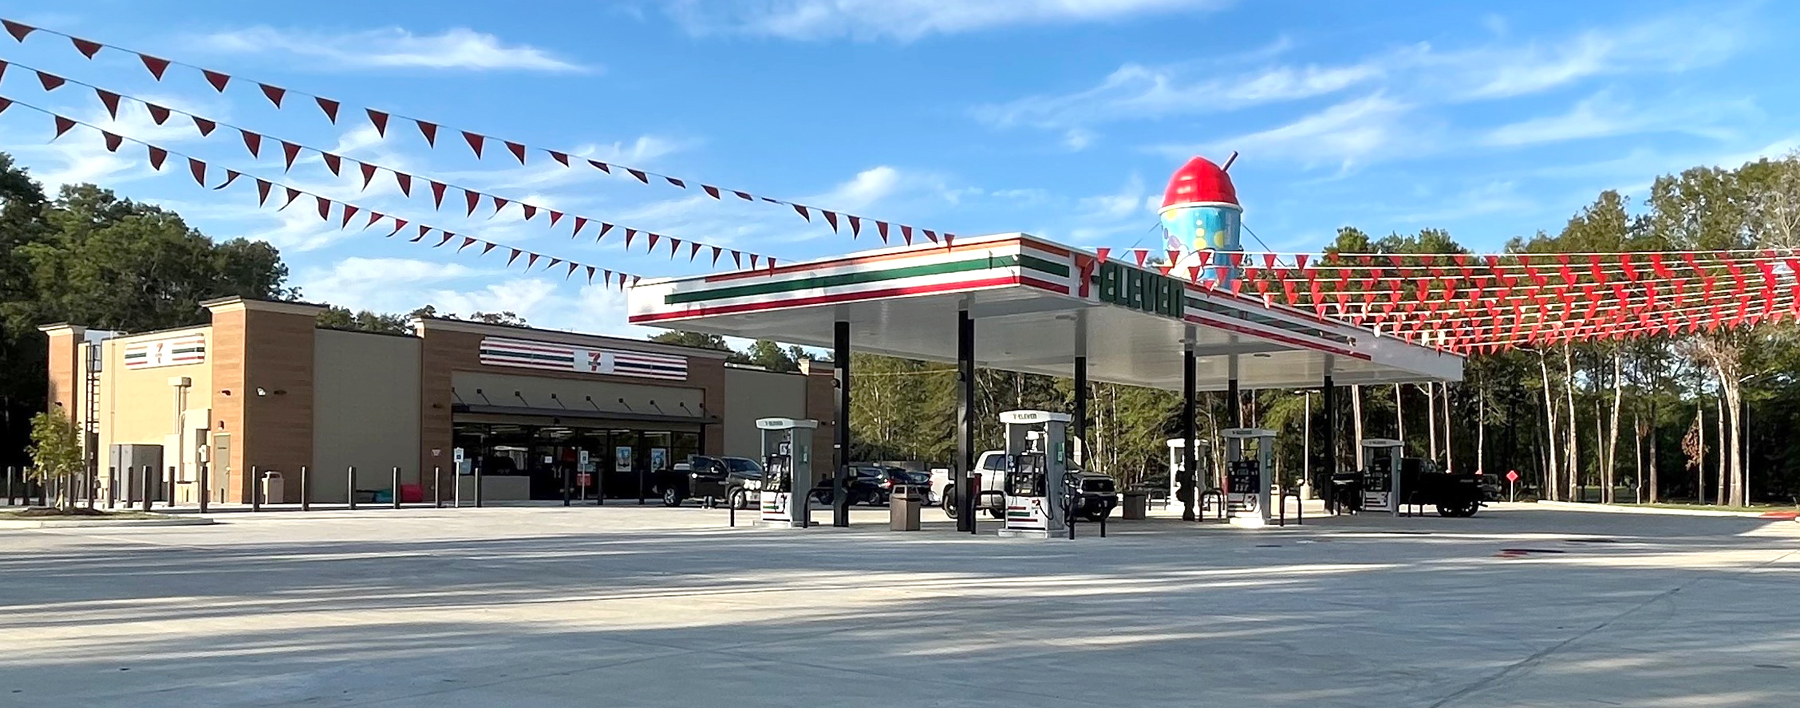 Construction is Bigger in Texas with 7-Eleven | GLR, Inc.